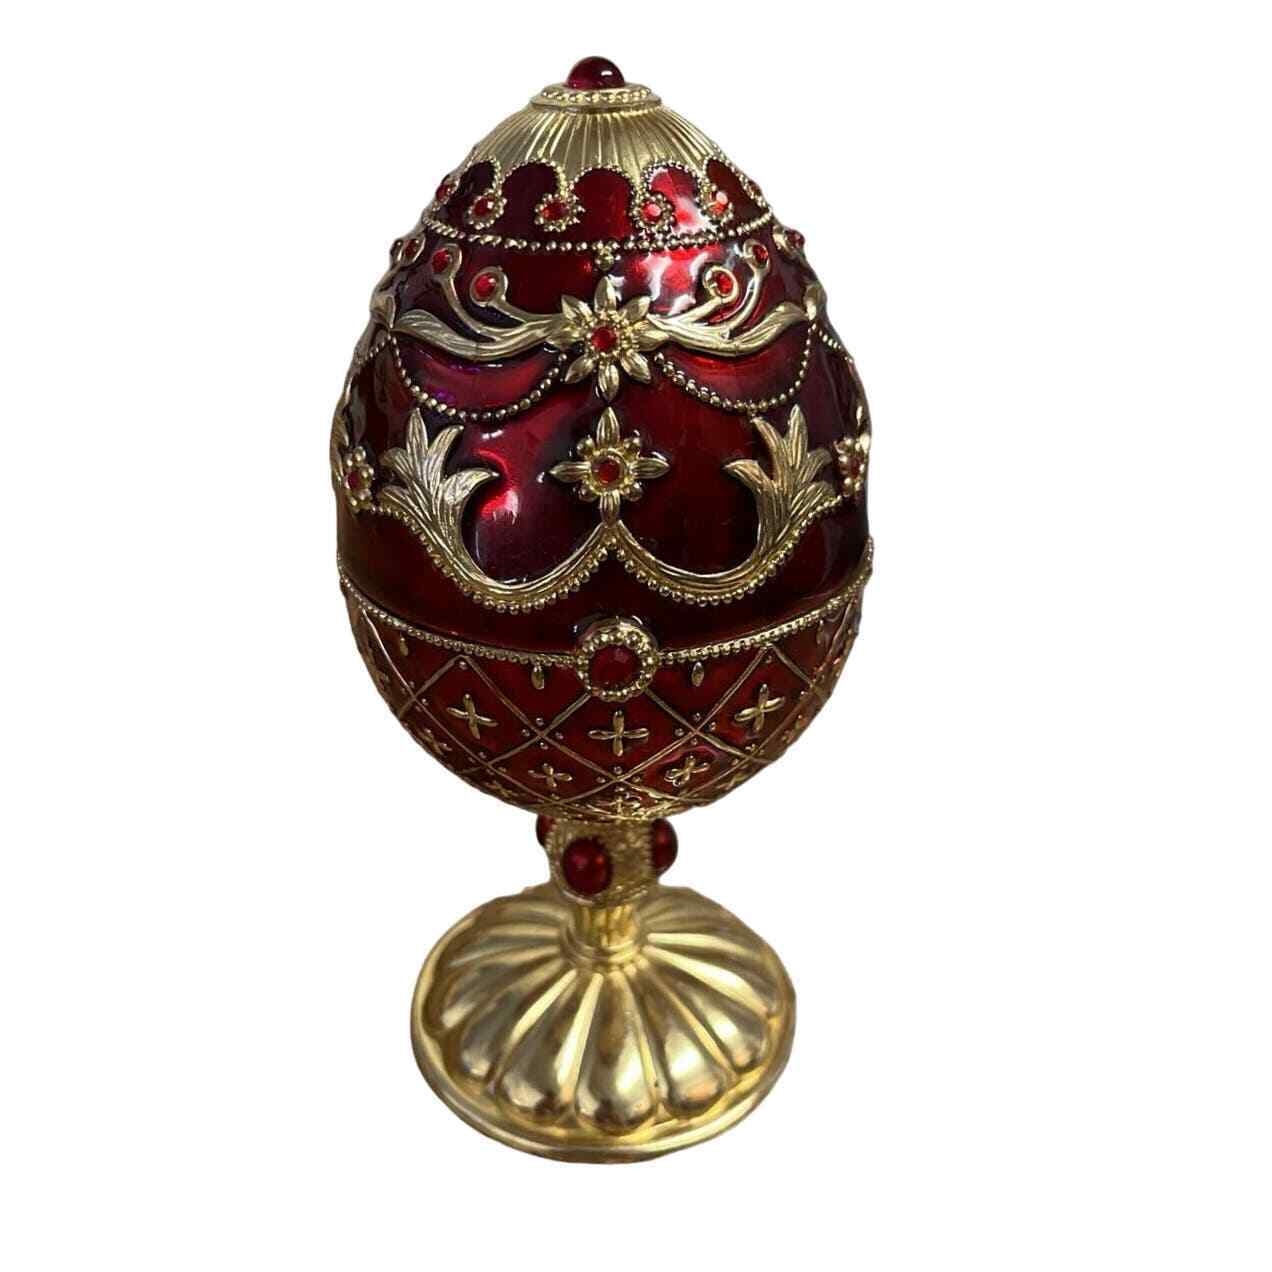 Holiday Musical Egg by Bombay, Jeweled, Plays Jingle Bells